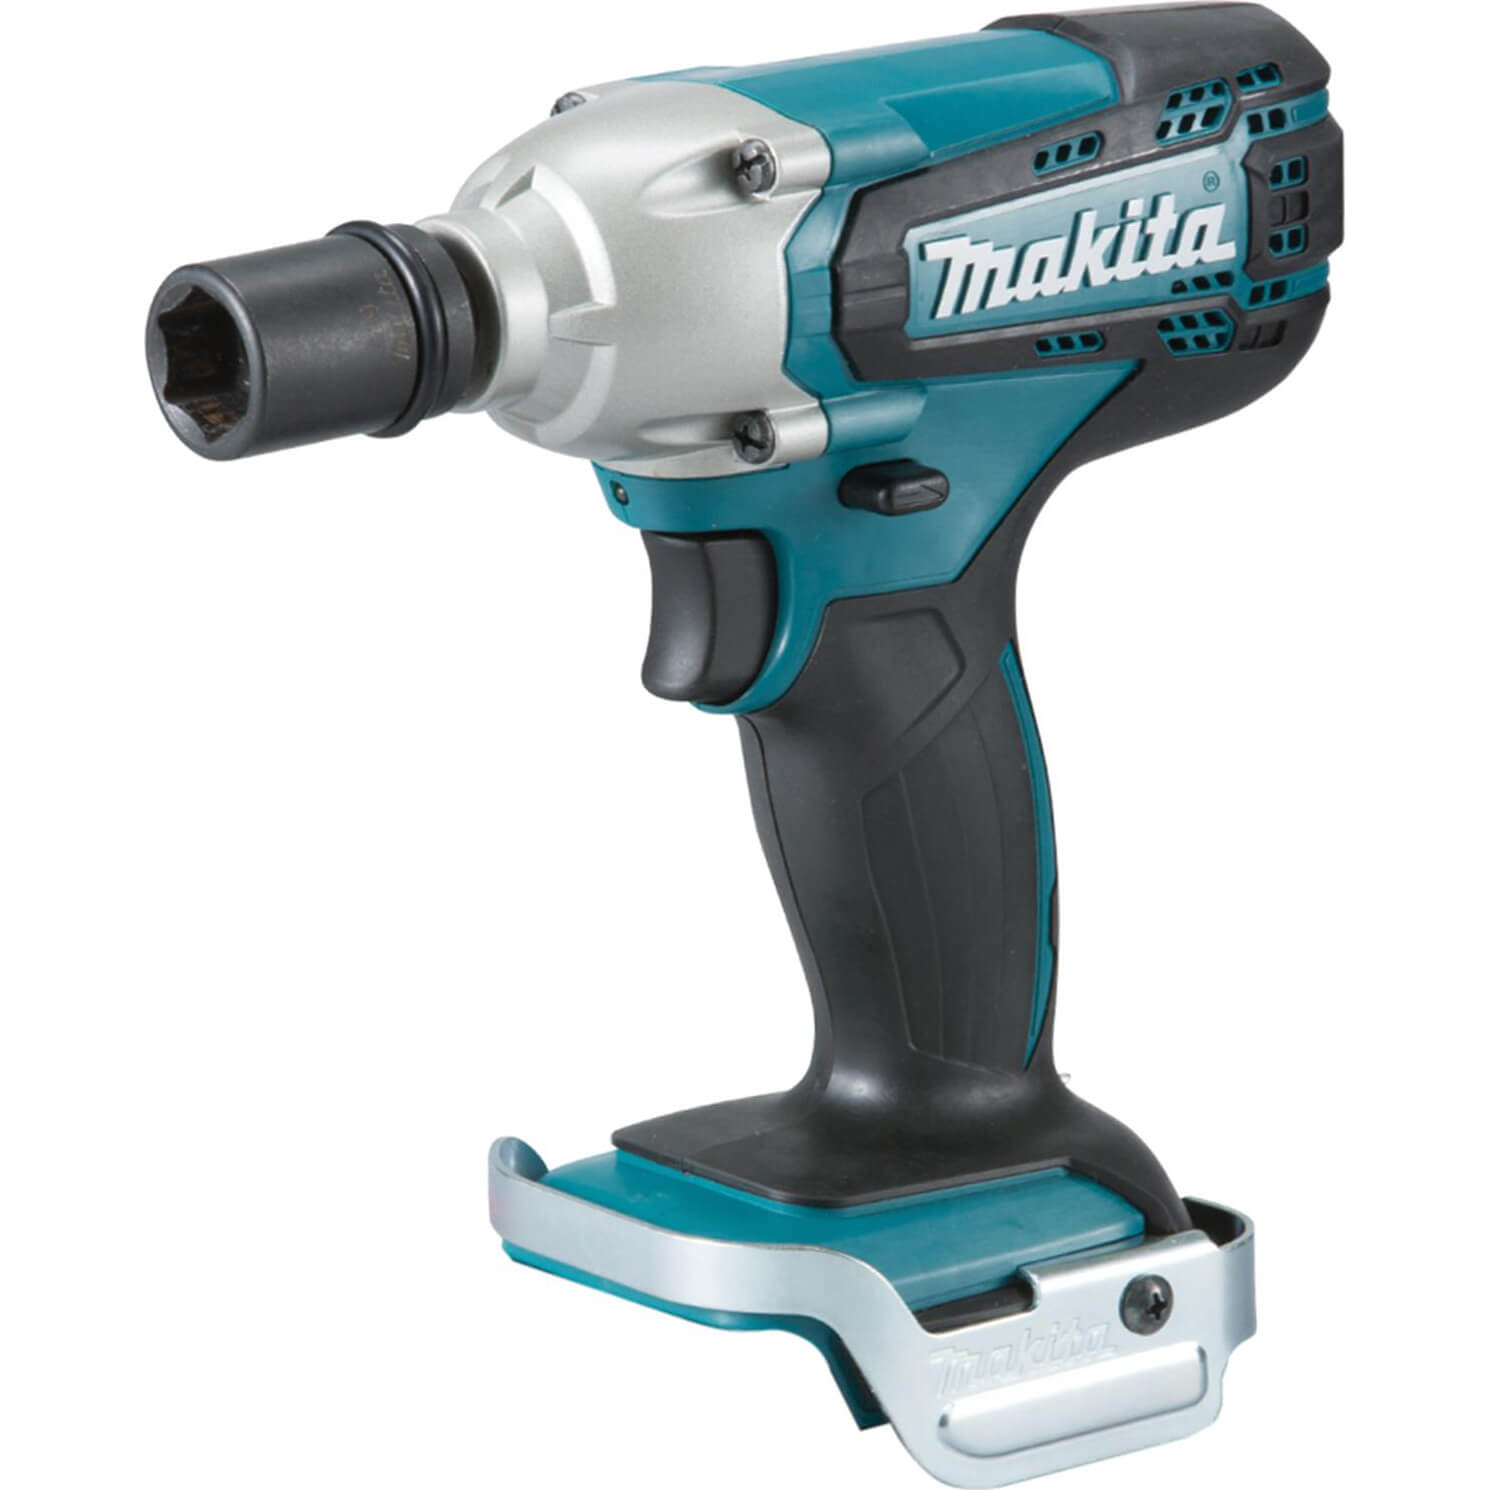 Makita DTW190 18v LXT Cordless 1/2" Drive Impact Wrench No Batteries No Charger No Case